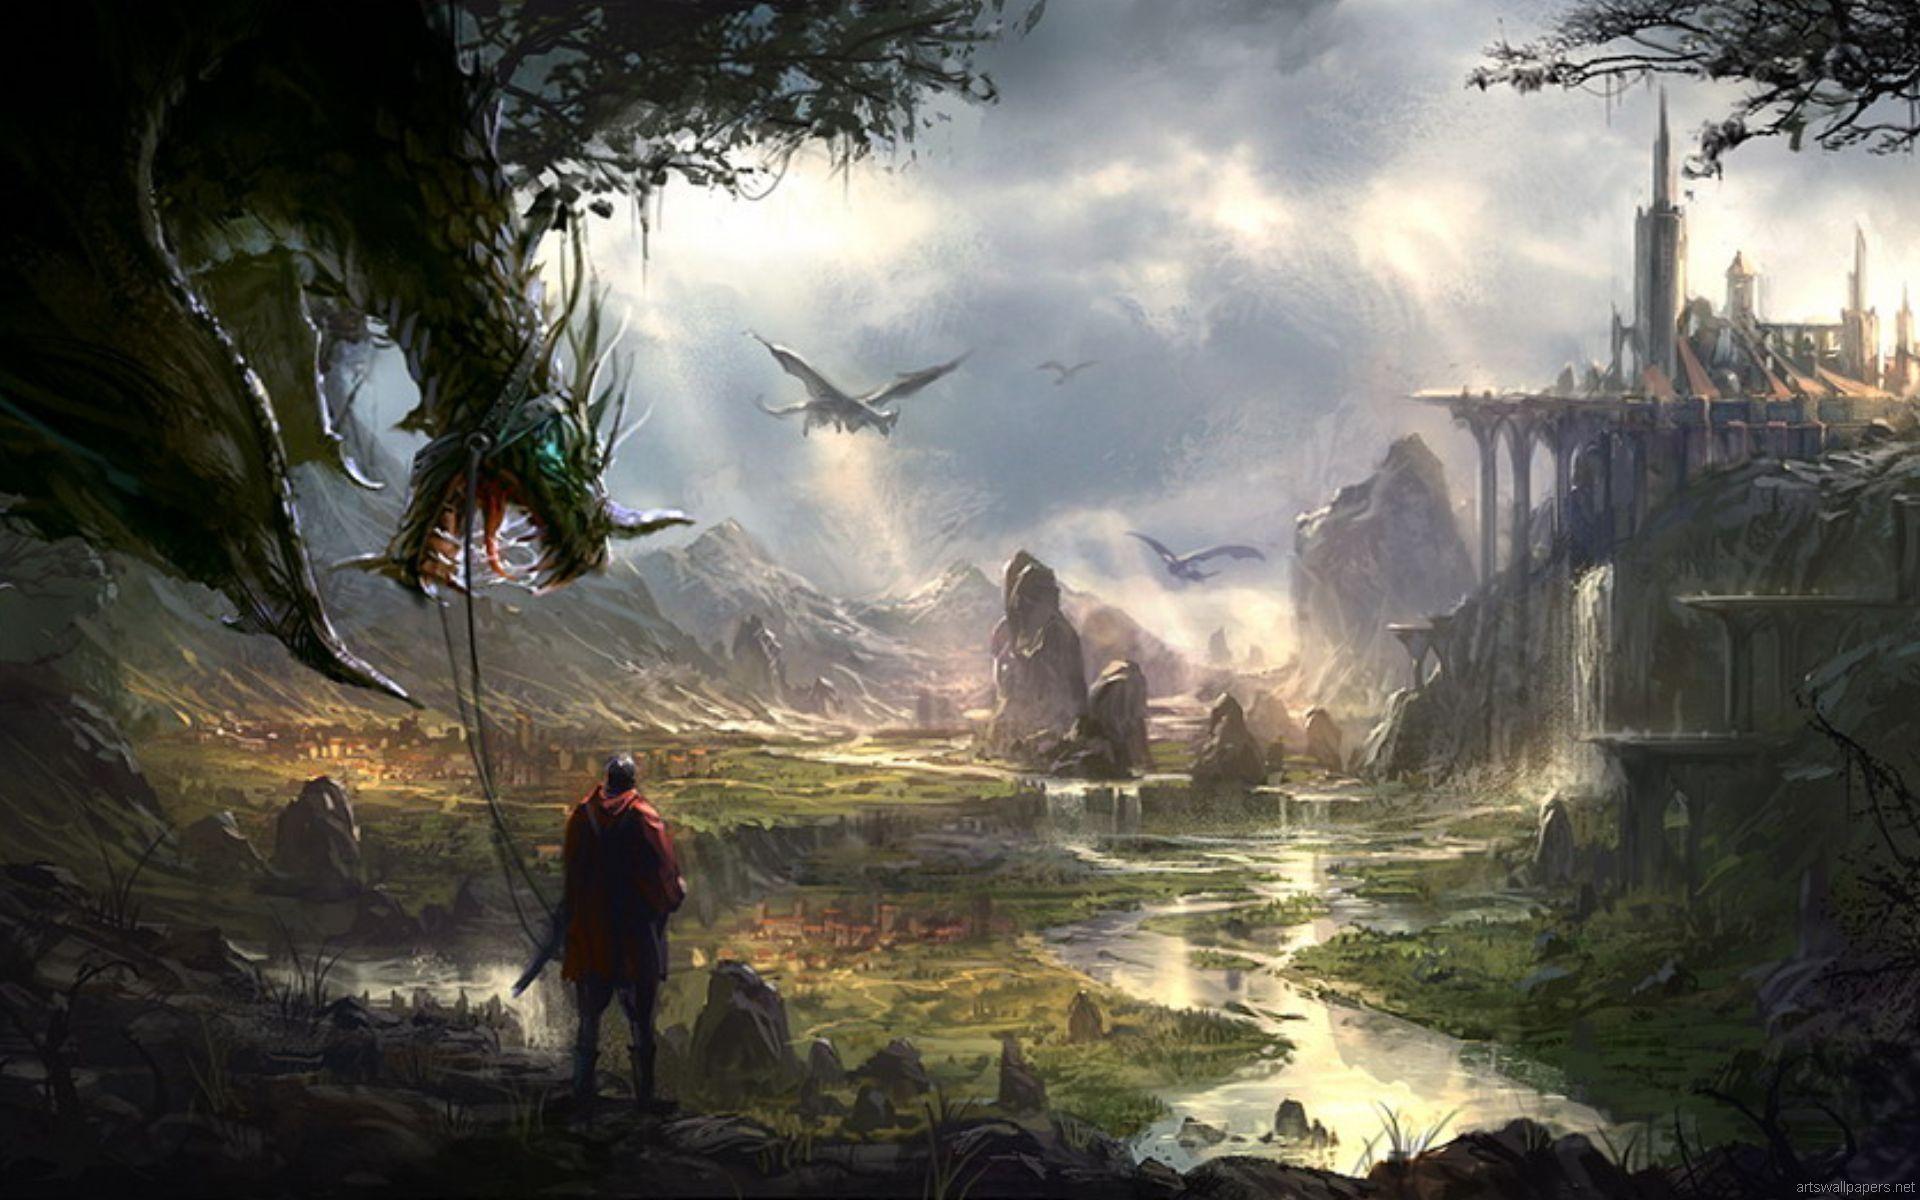 Taming dragons the old fashioned way. Fantasy picture, Fantasy image, Fantasy art landscapes